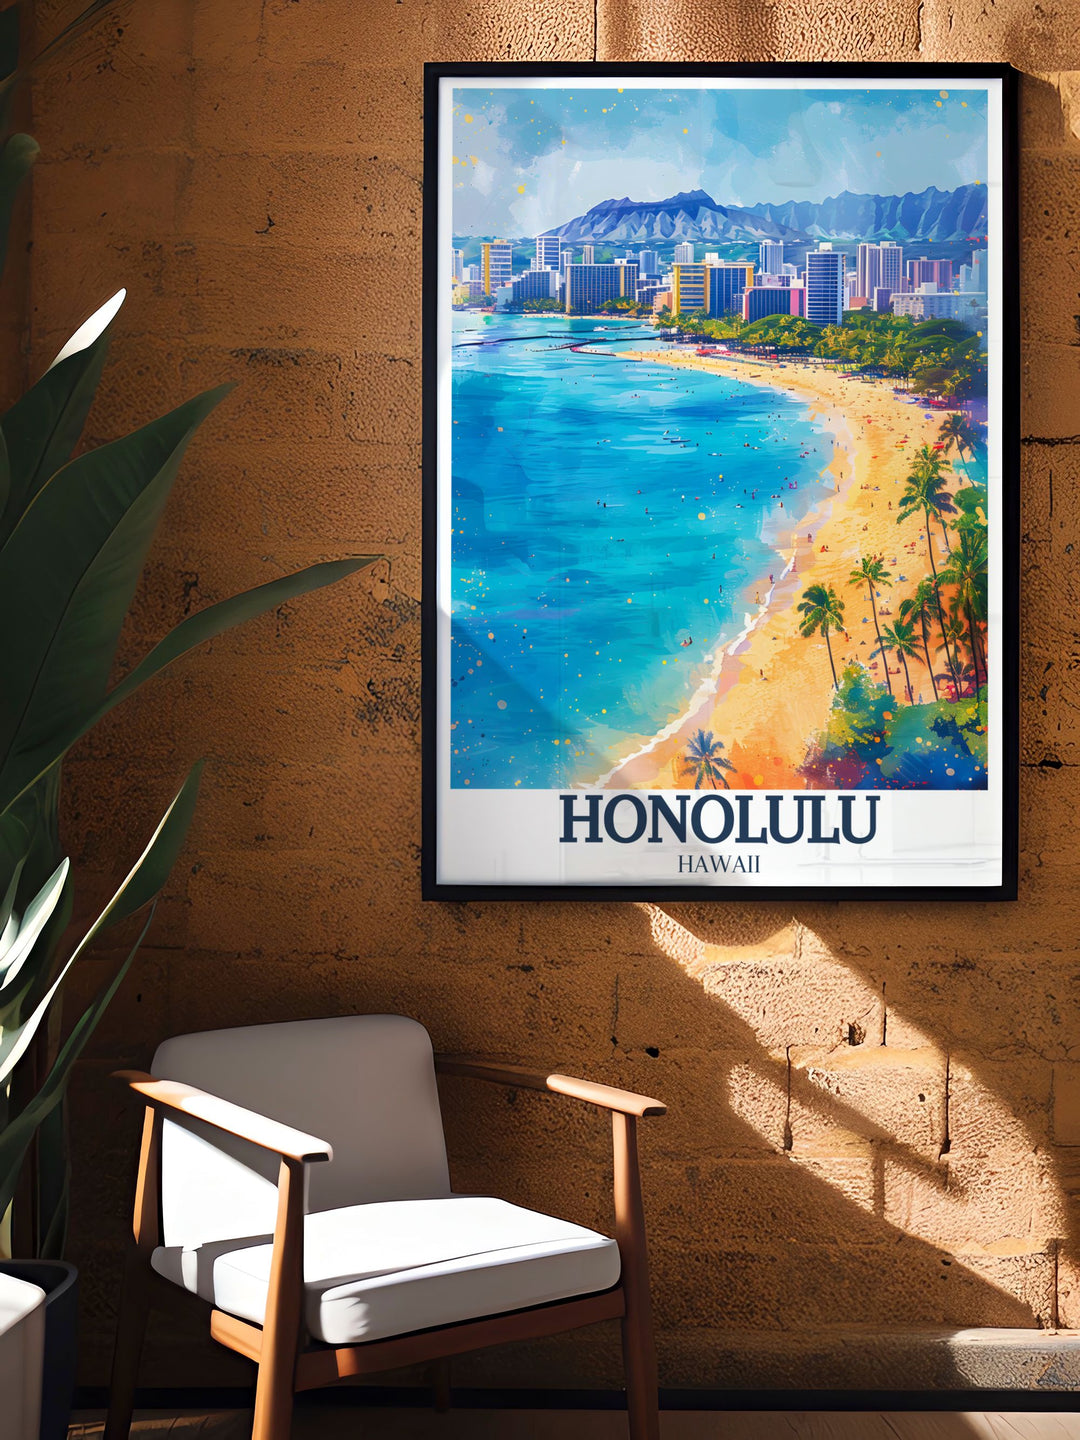 Framed art print of the Aloha Tower, capturing the elegance and historical charm of this iconic landmark in Honolulu, Hawaii. The artwork showcases the towers detailed architecture and picturesque harbor views, making it a striking addition to any art collection.